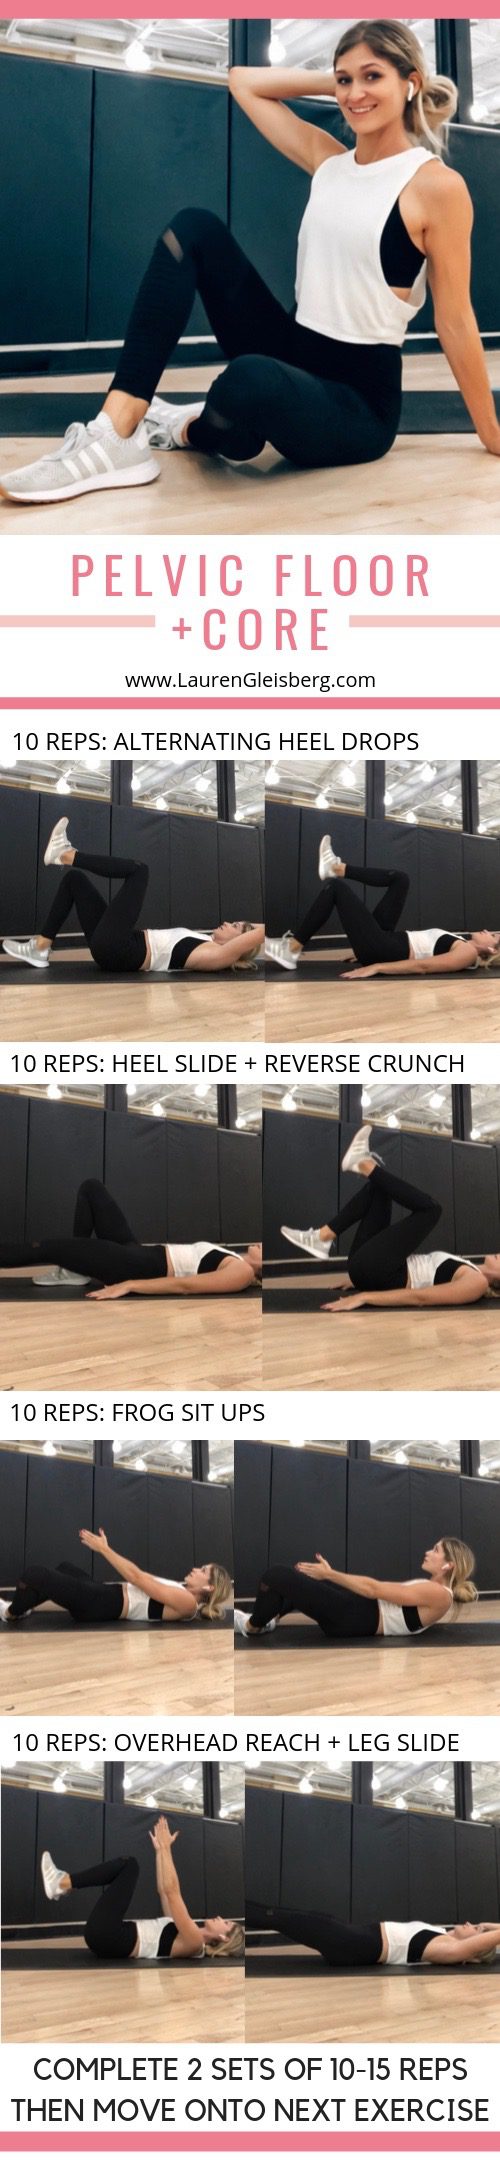 pelvic floor and core workout